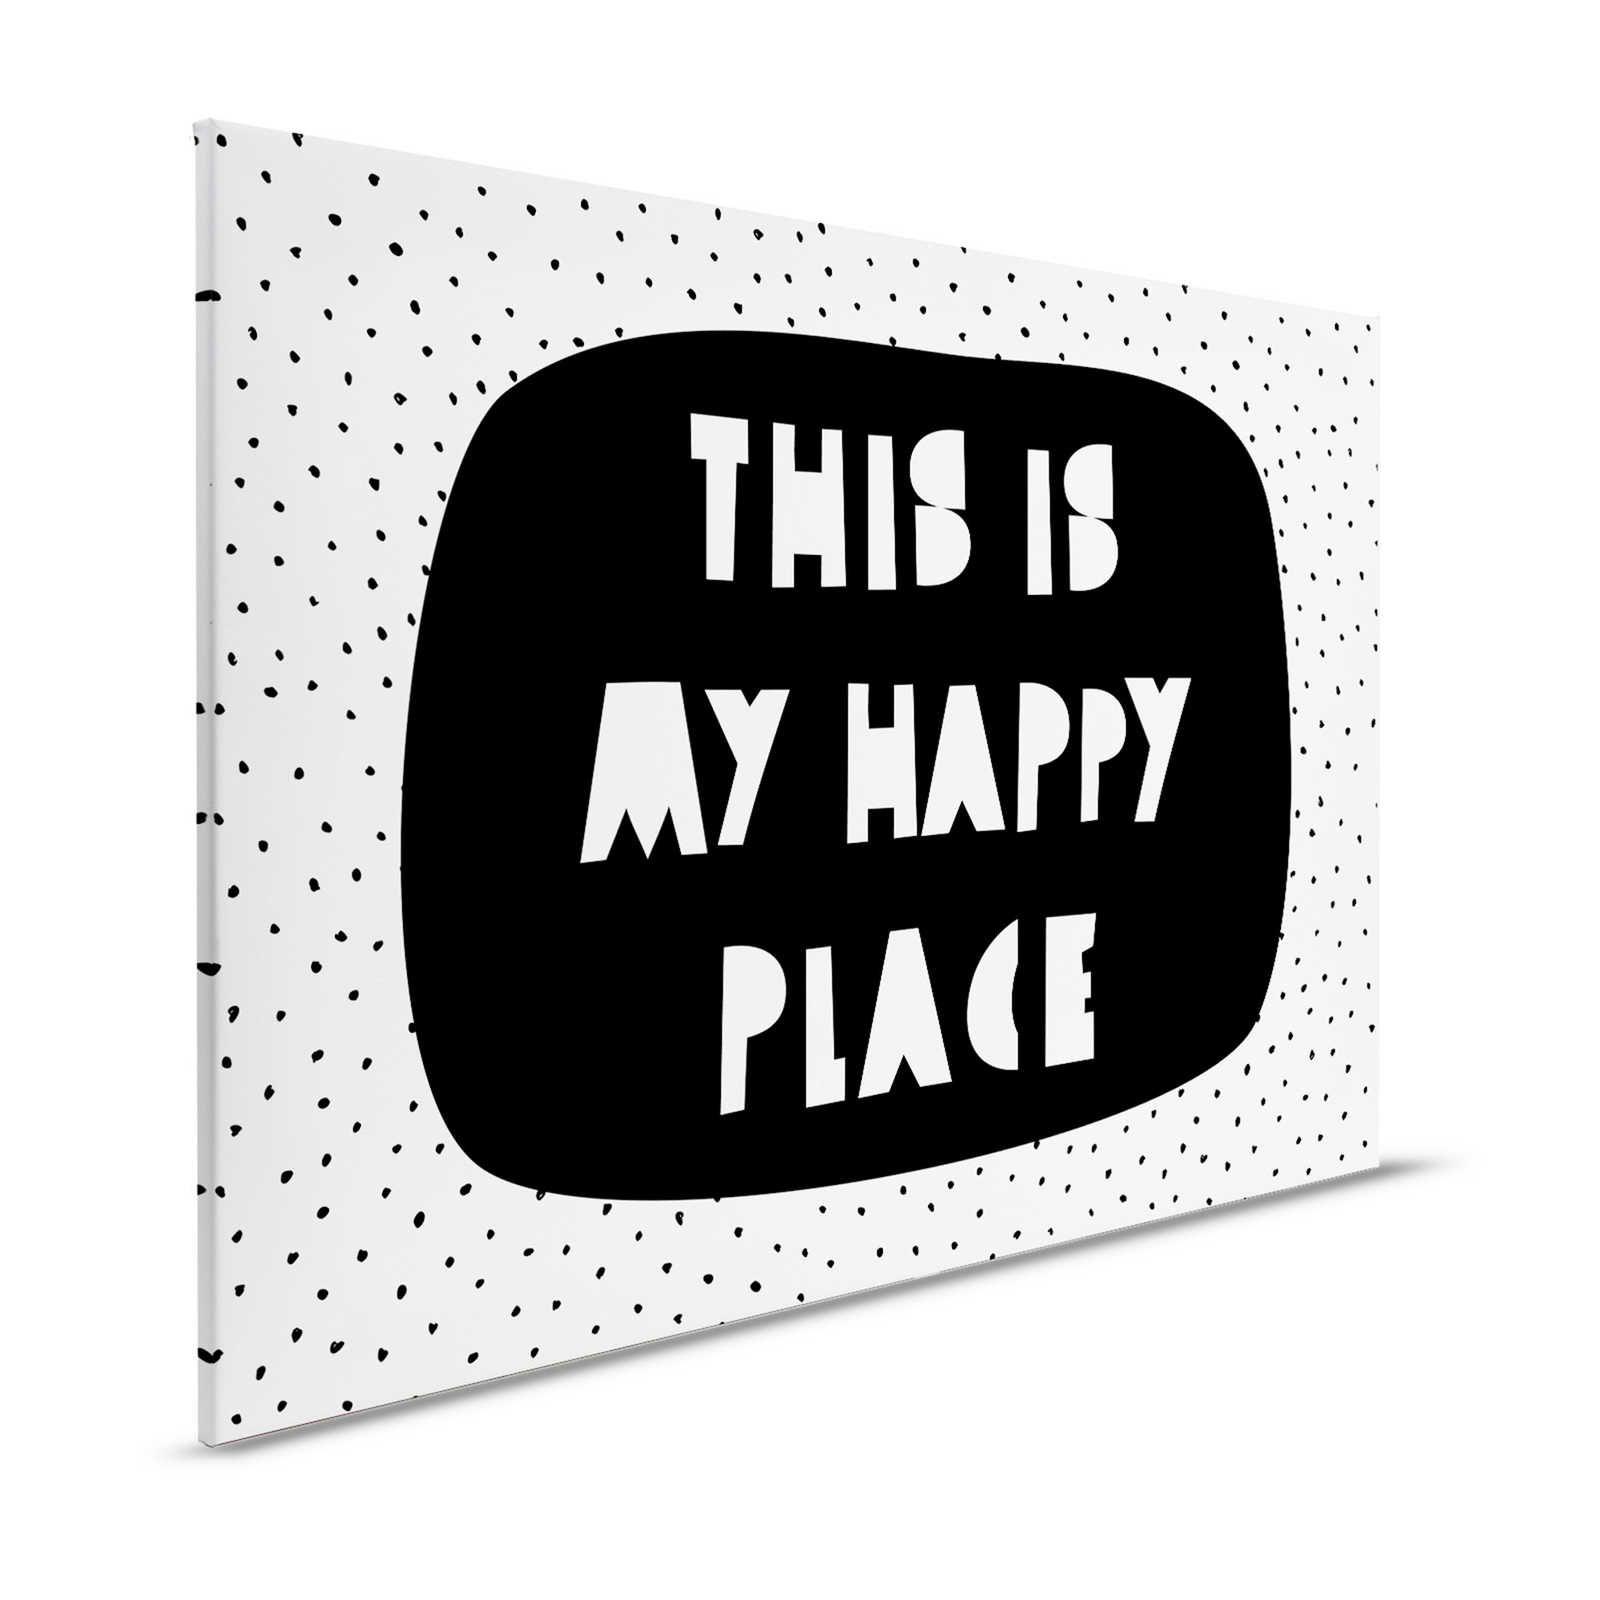 Canvas for children's room with lettering "This is my happy place" - 120 cm x 80 cm
